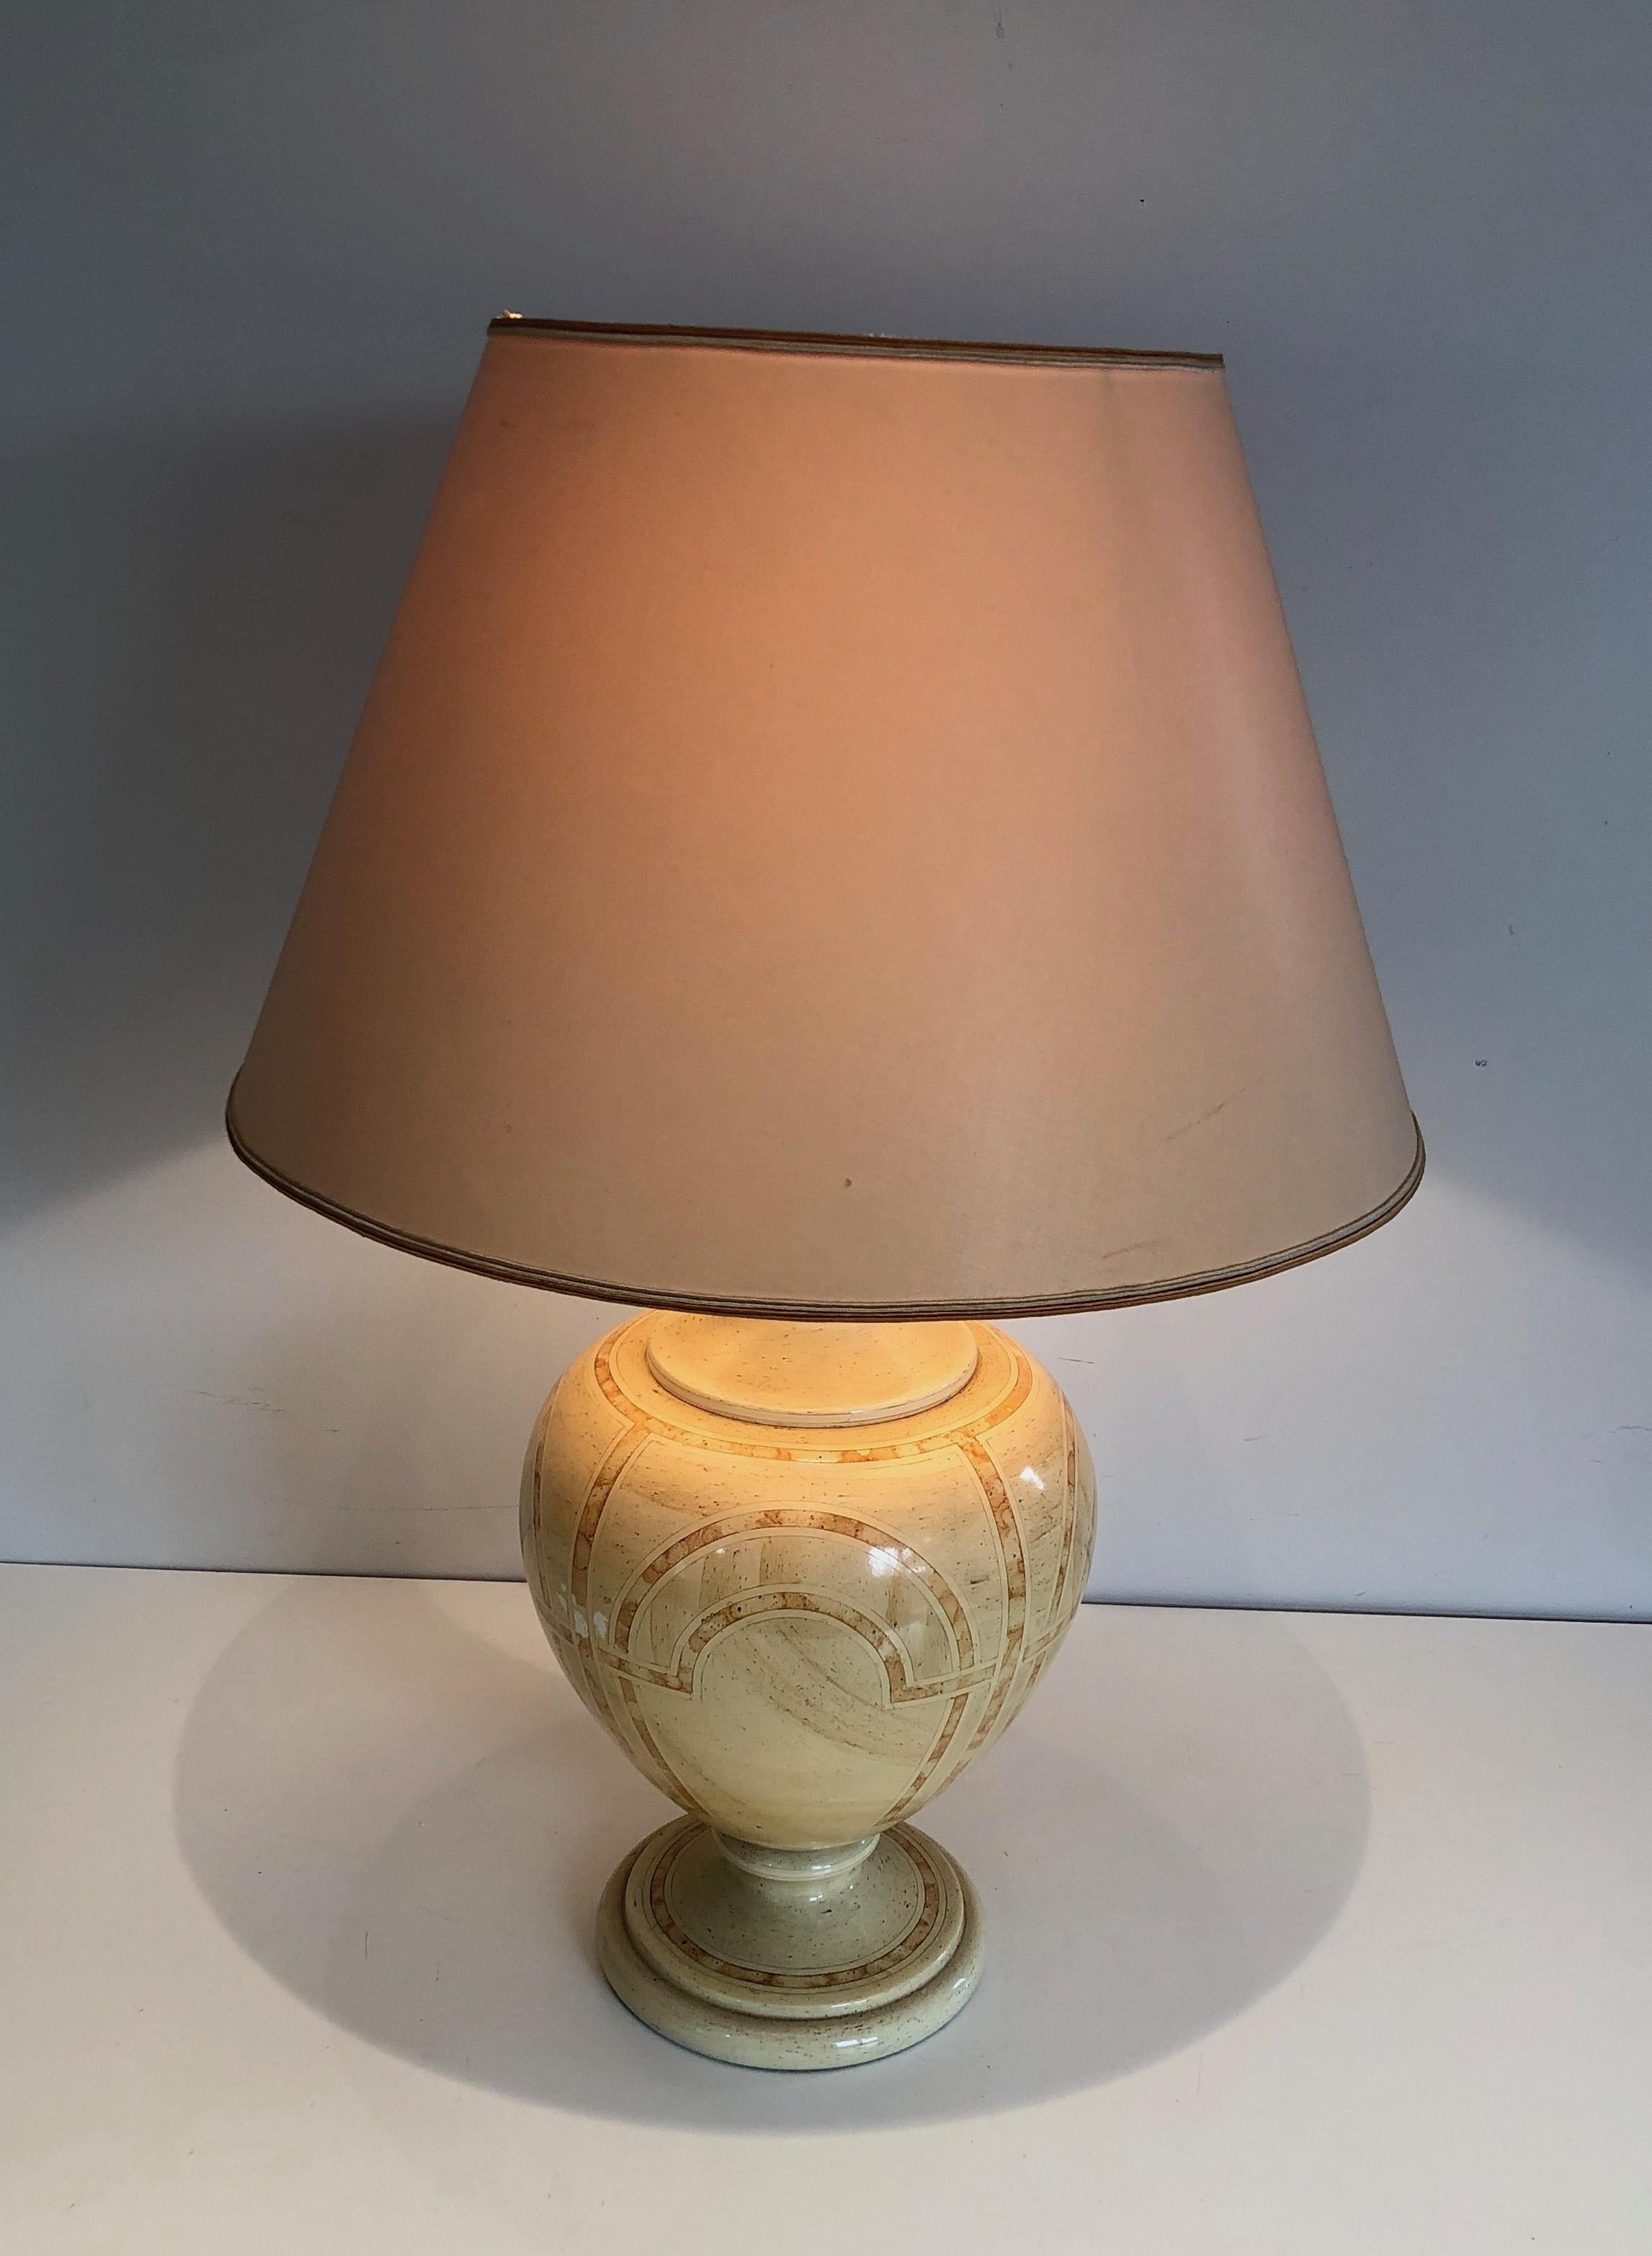 Eggshell Lacquered Table Lamp with Interlacing Decors, French Work, circa 1970 For Sale 11